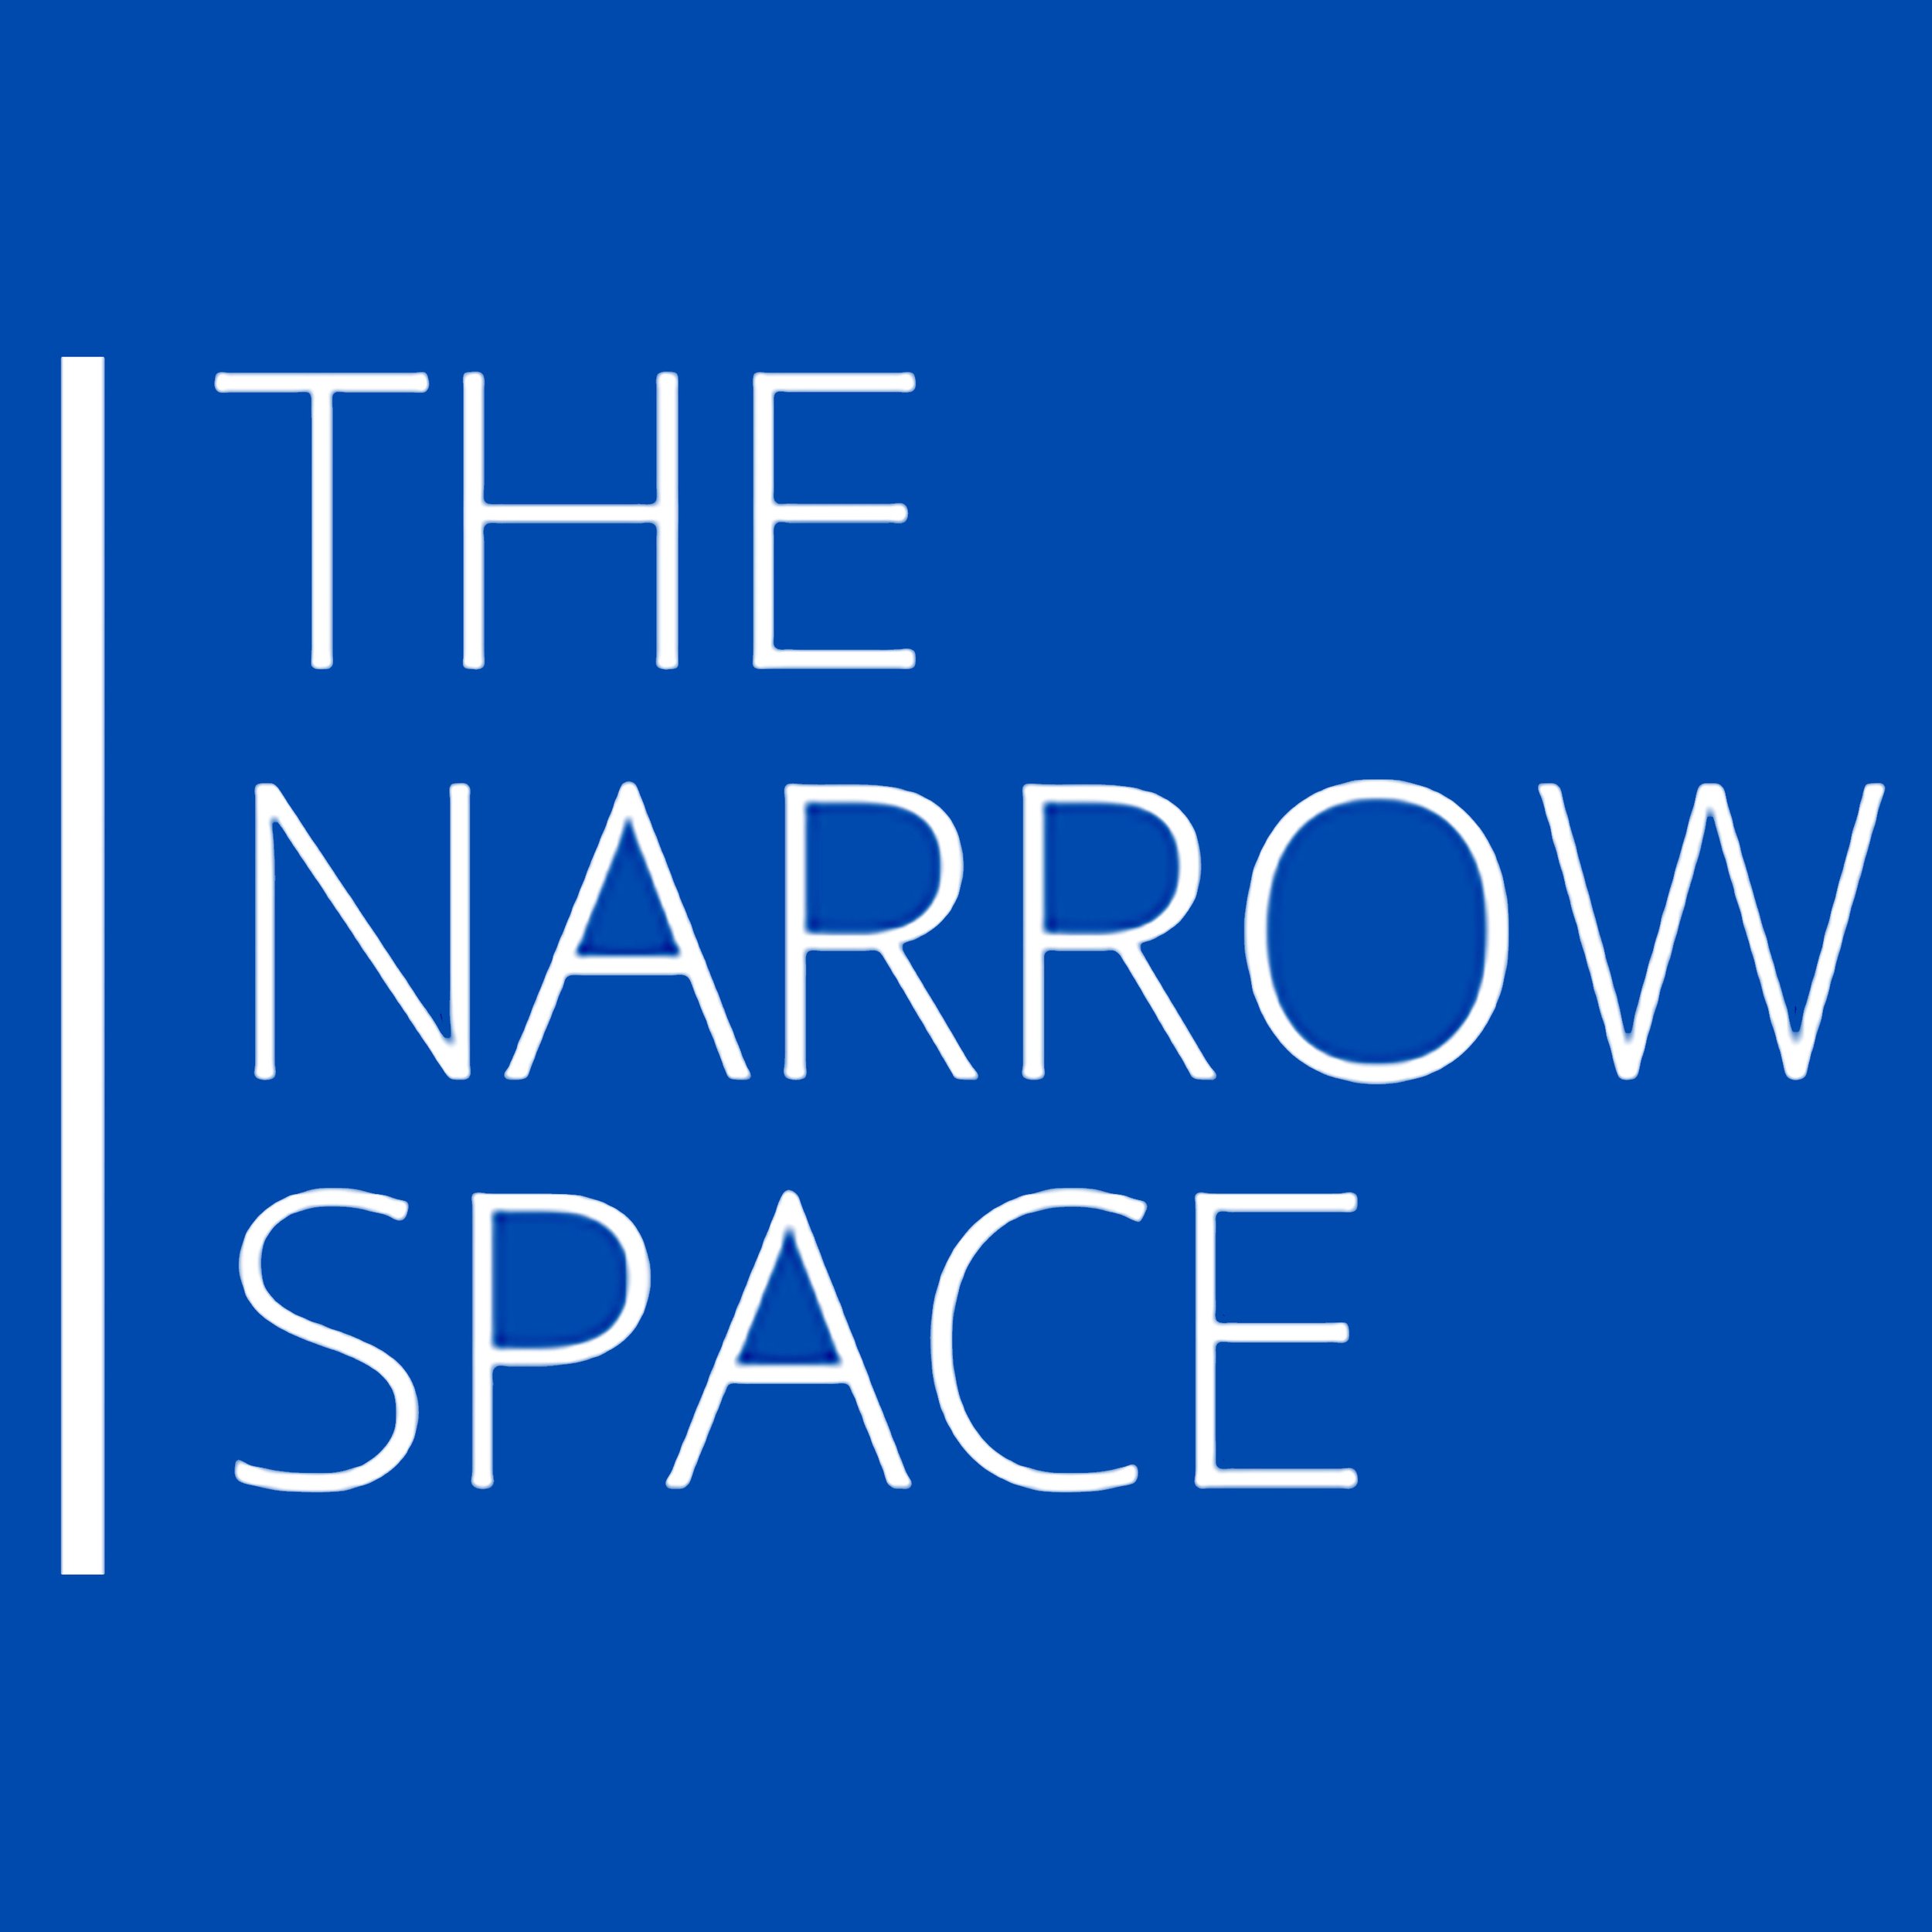 The Narrow Space